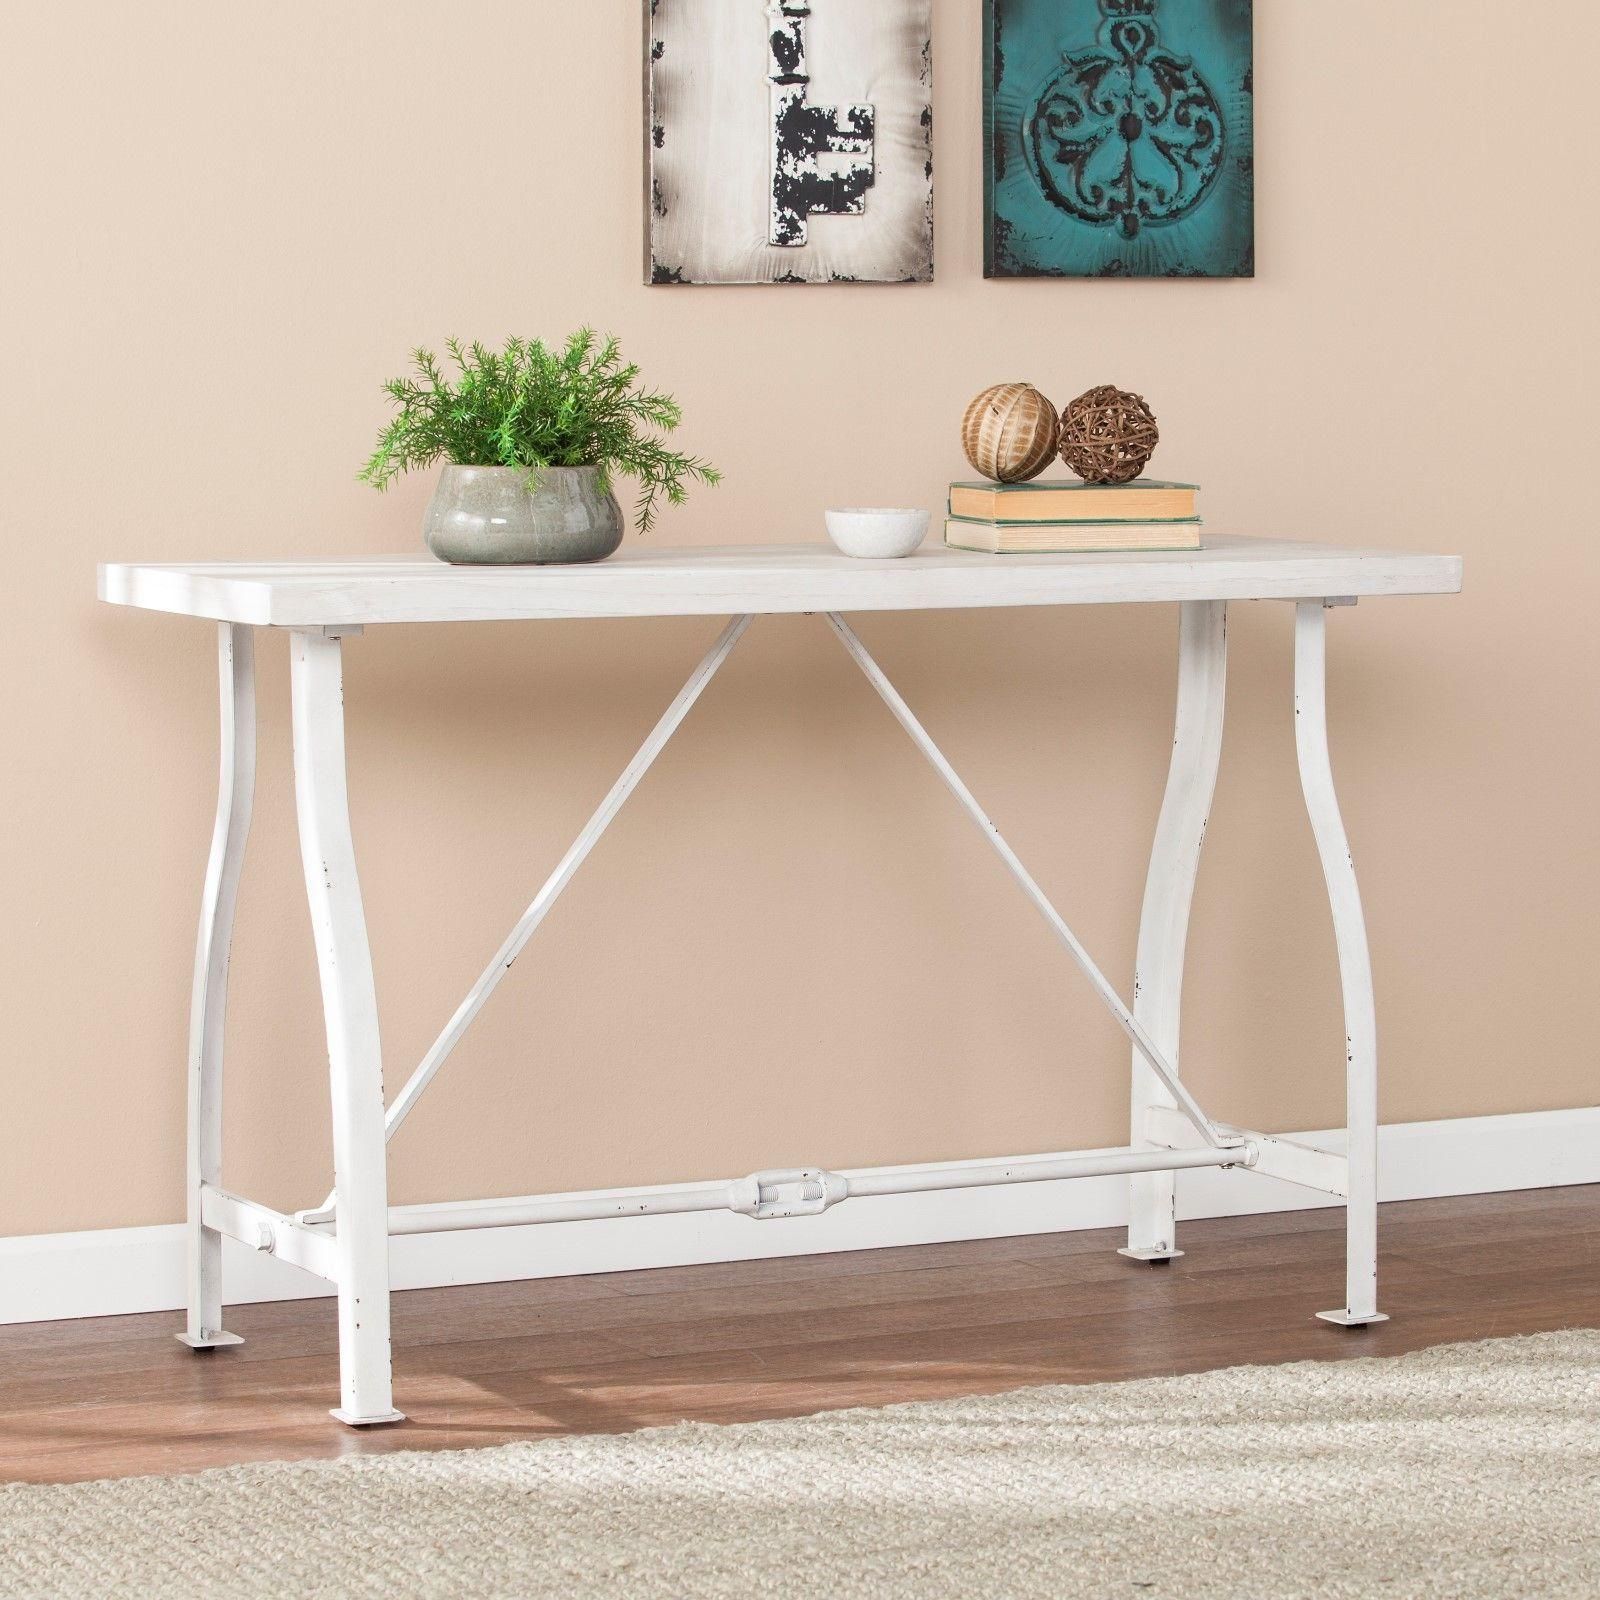 Cst45901 Farmhouse Style Console Table – Distressed White Within Well Known White Geometric Console Tables (View 10 of 10)